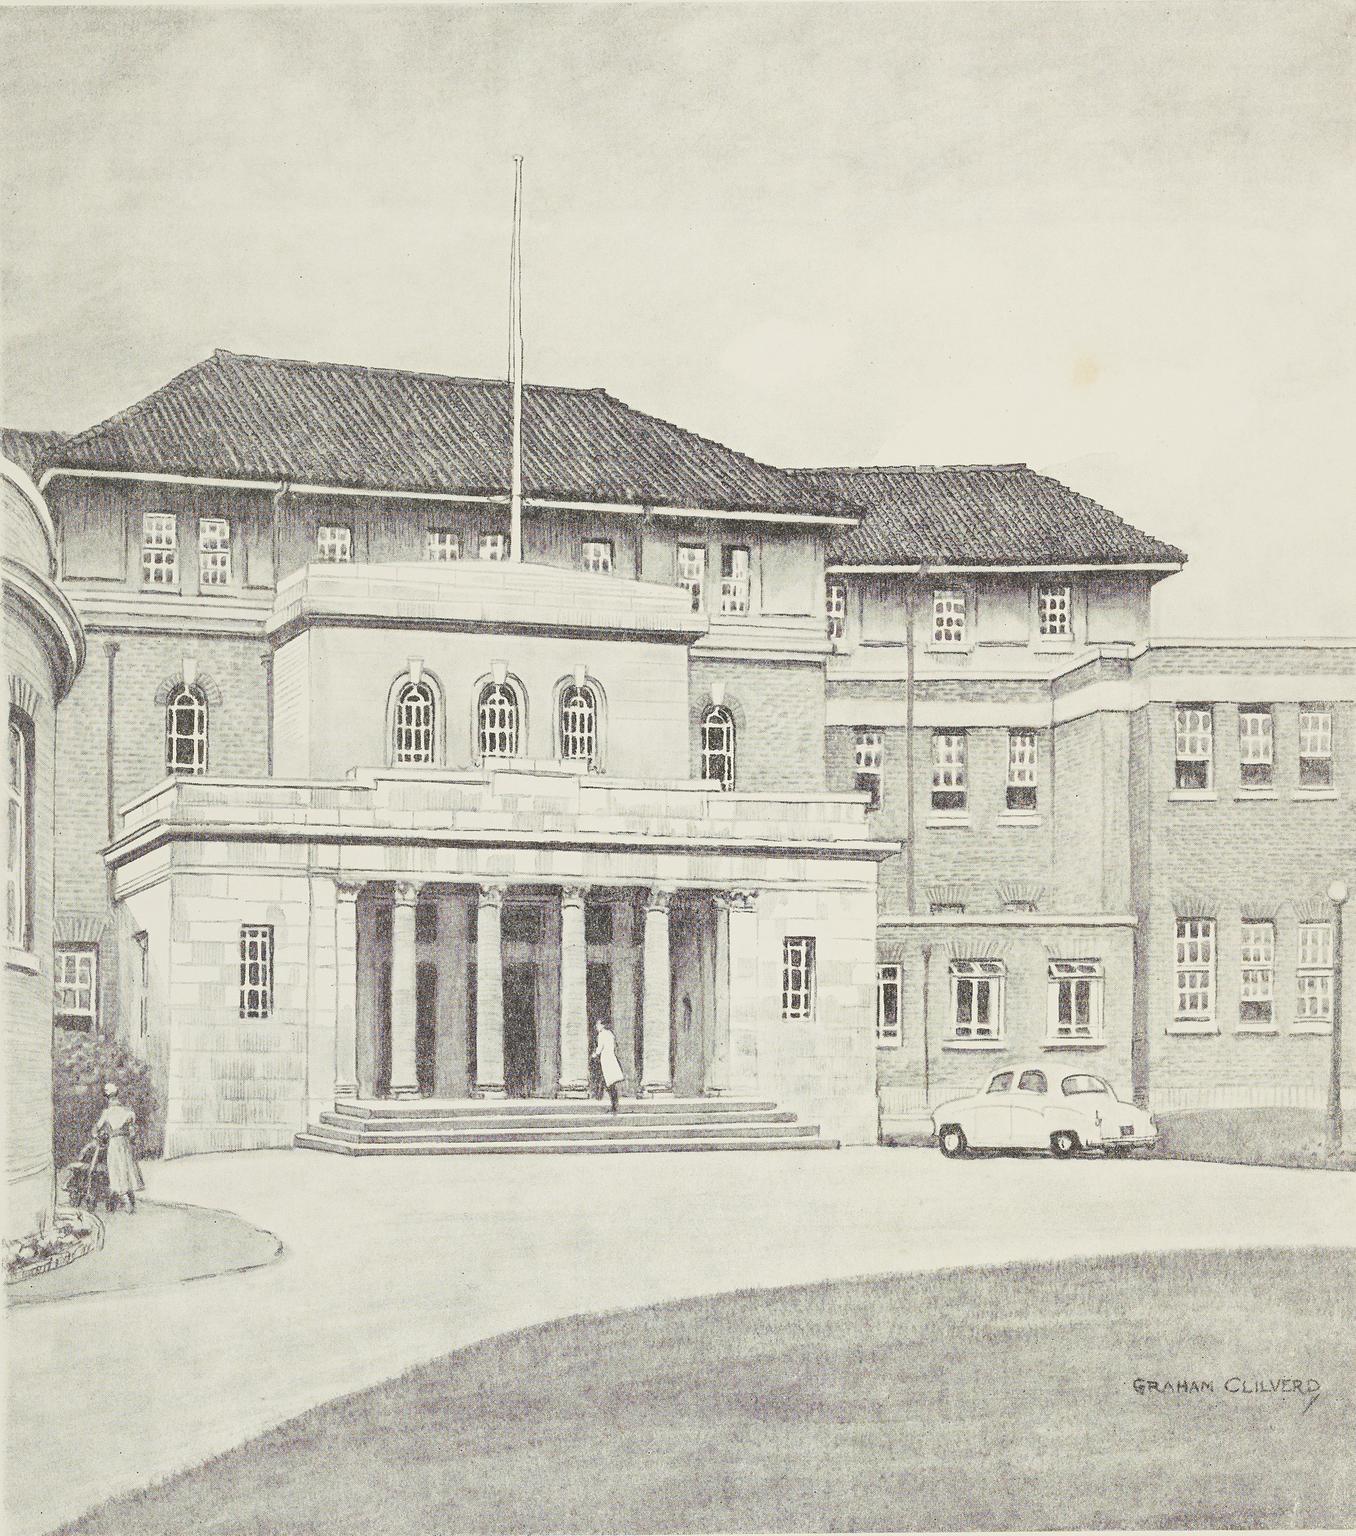 Print of Christie Hospital and Holt Radium Institute, Manchester, pencil, by Graham Clilverd, 1950–1965